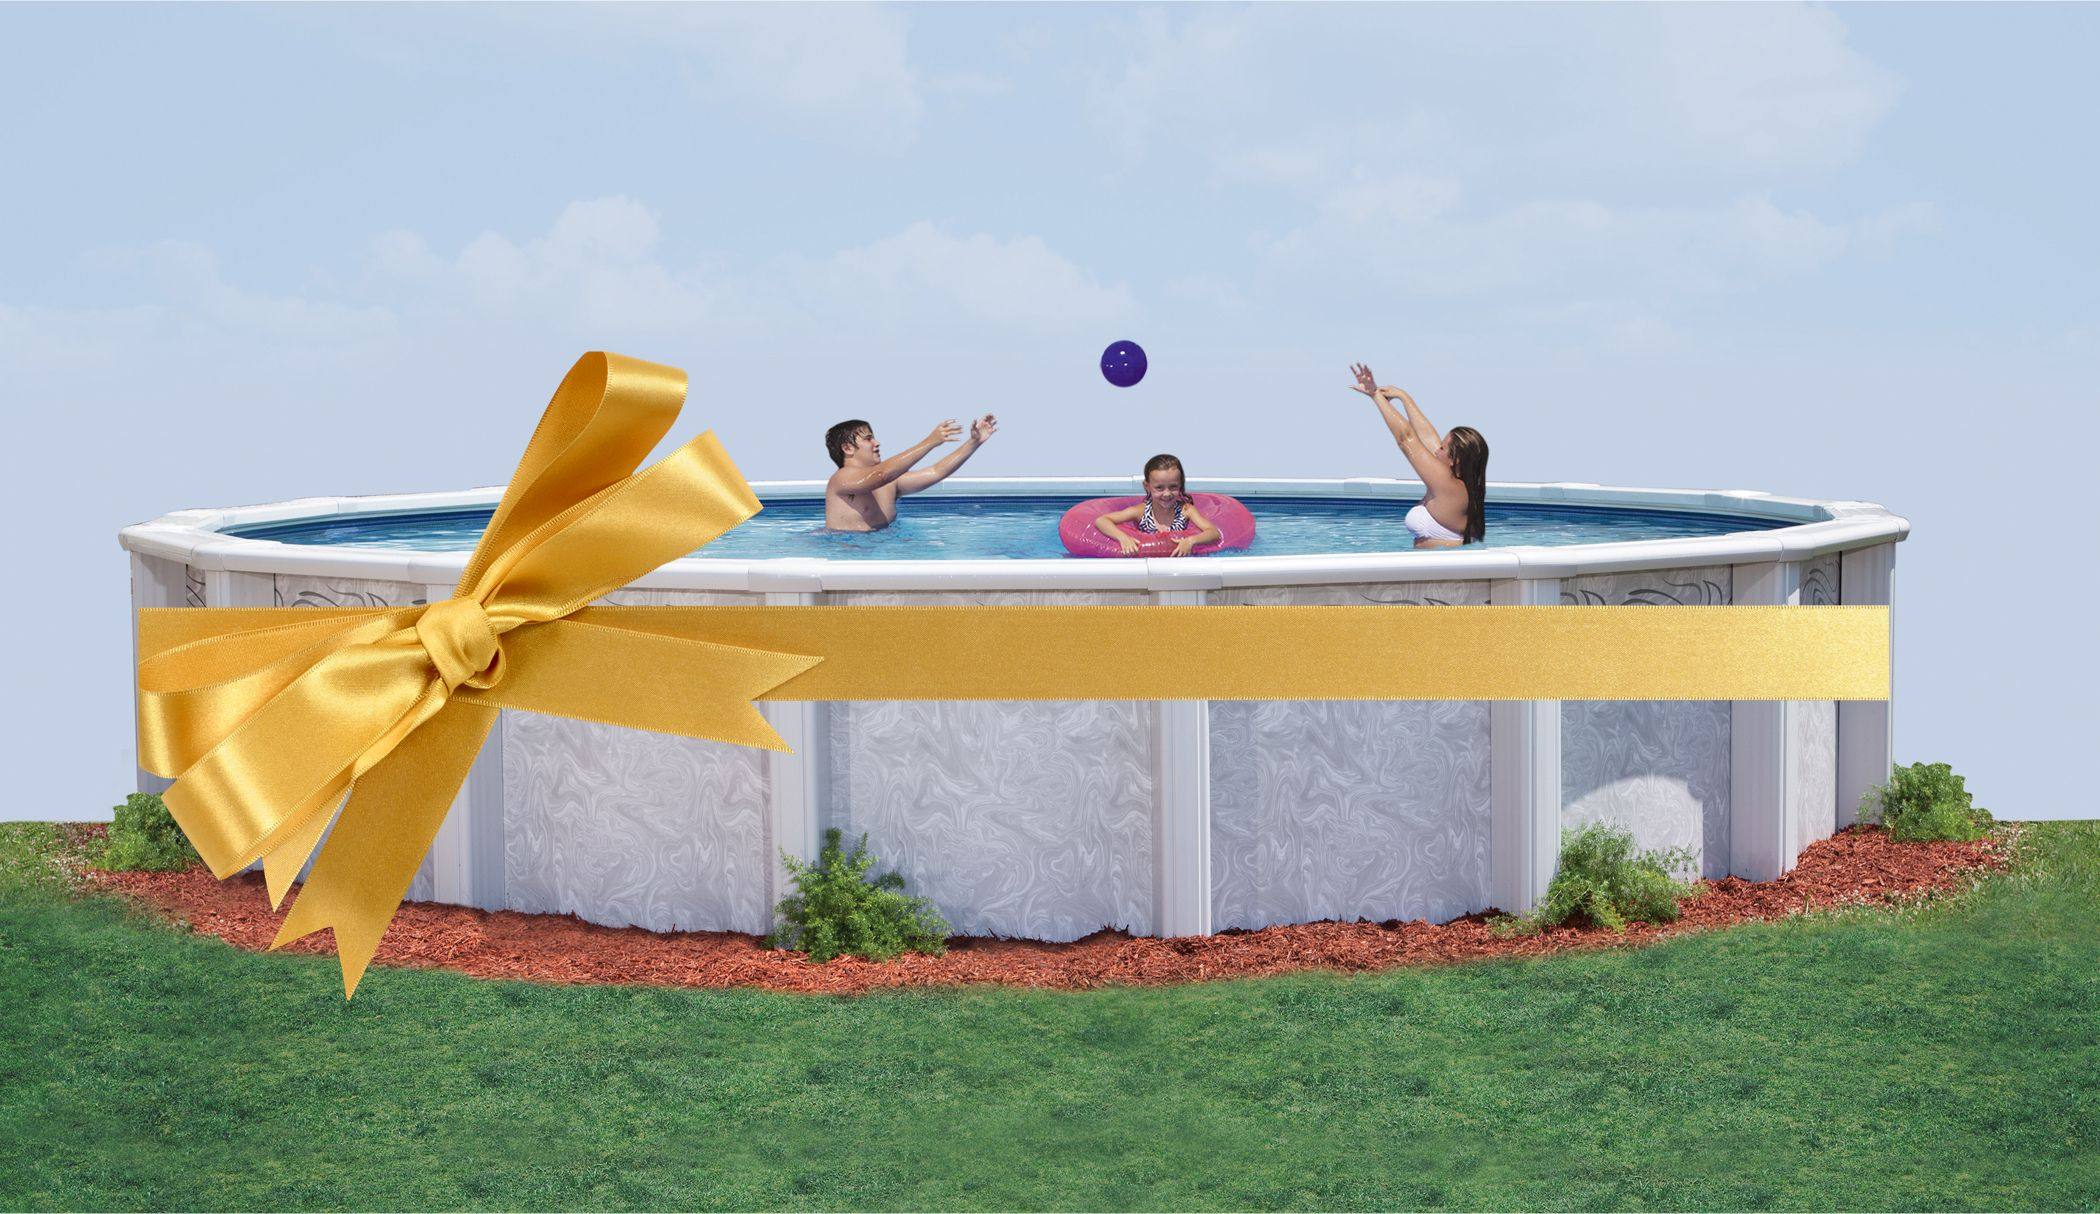 A Doughboy above ground swimming pool with three kids playing inside. There is a gold ribbon around the pool to signify that it is a Christmas gift.